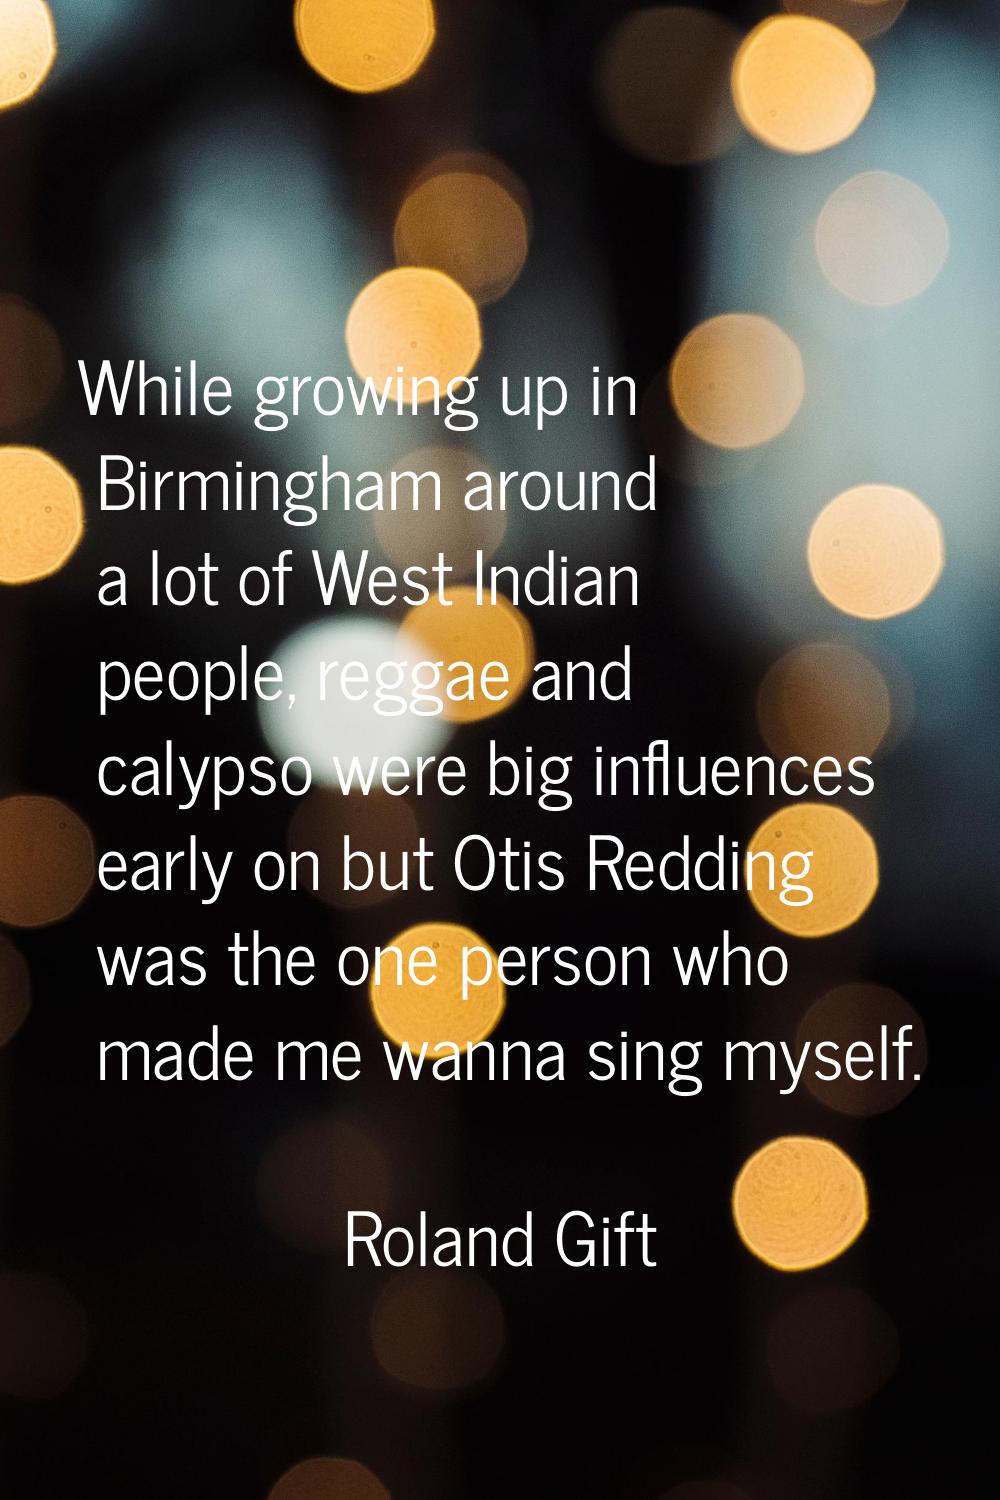 While growing up in Birmingham around a lot of West Indian people, reggae and calypso were big infl